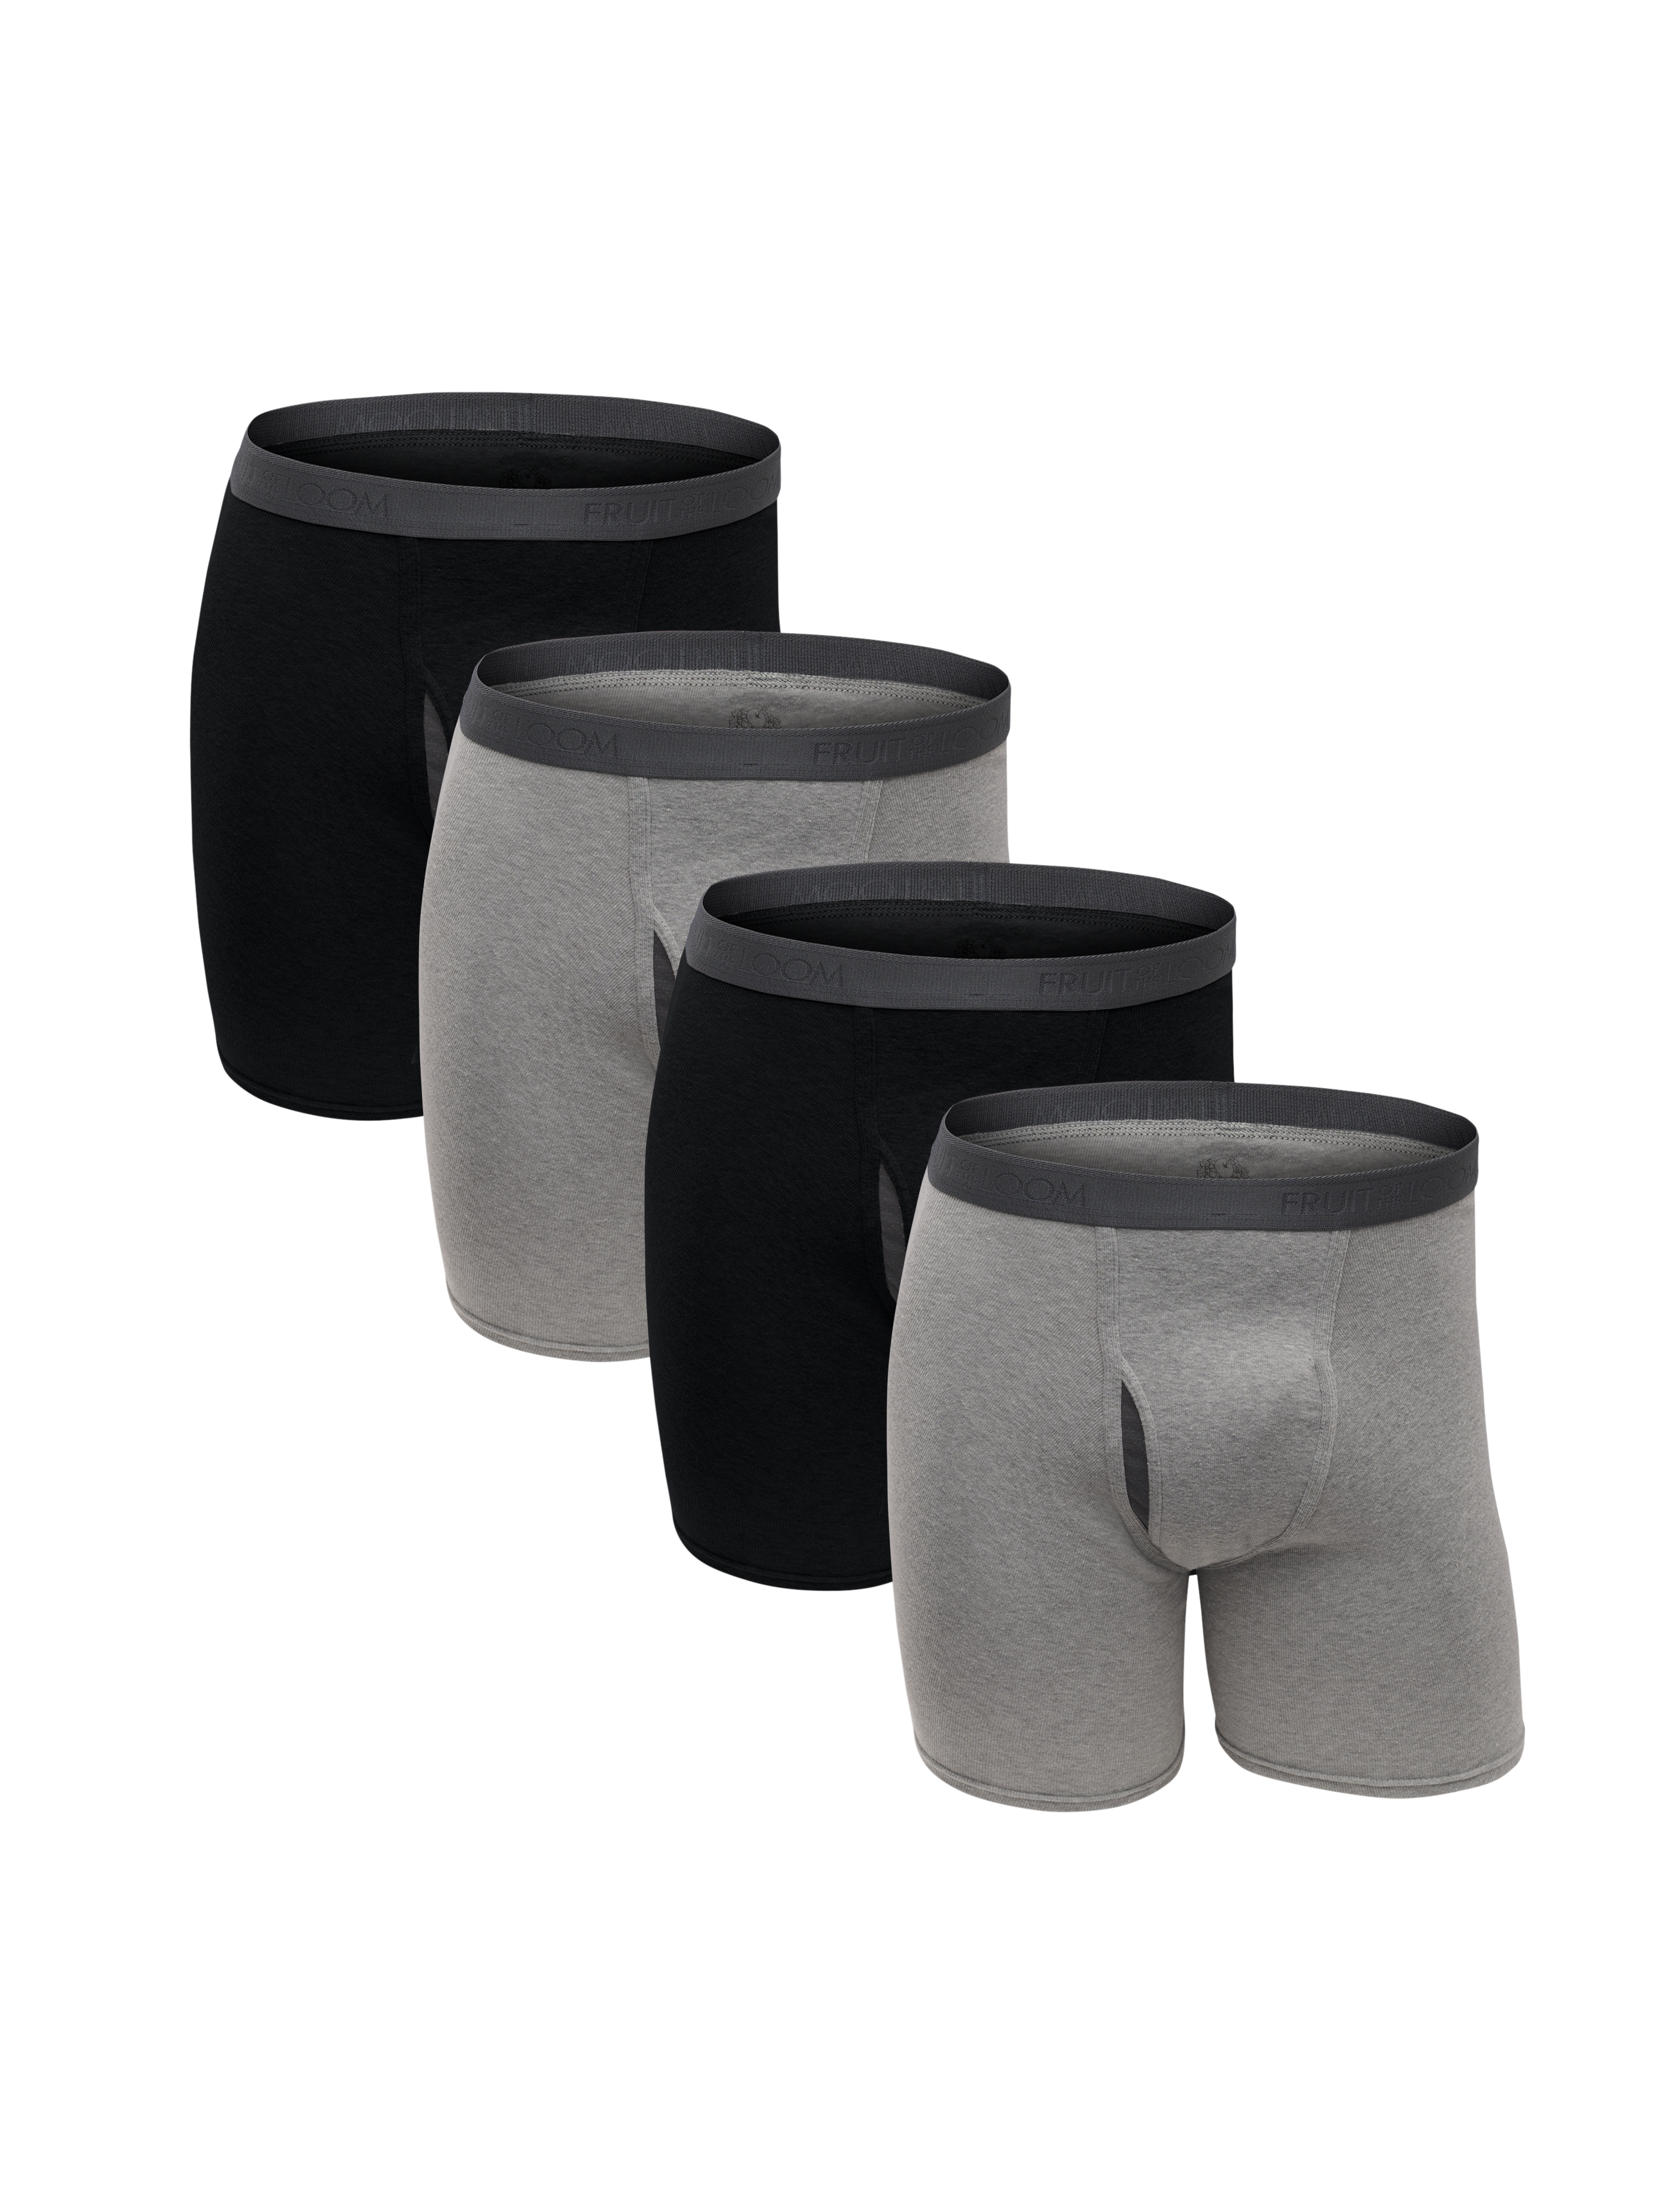 Fruit of the Loom Men's Premium CoolZone® Boxer Briefs, Black and Gray 4 Pack